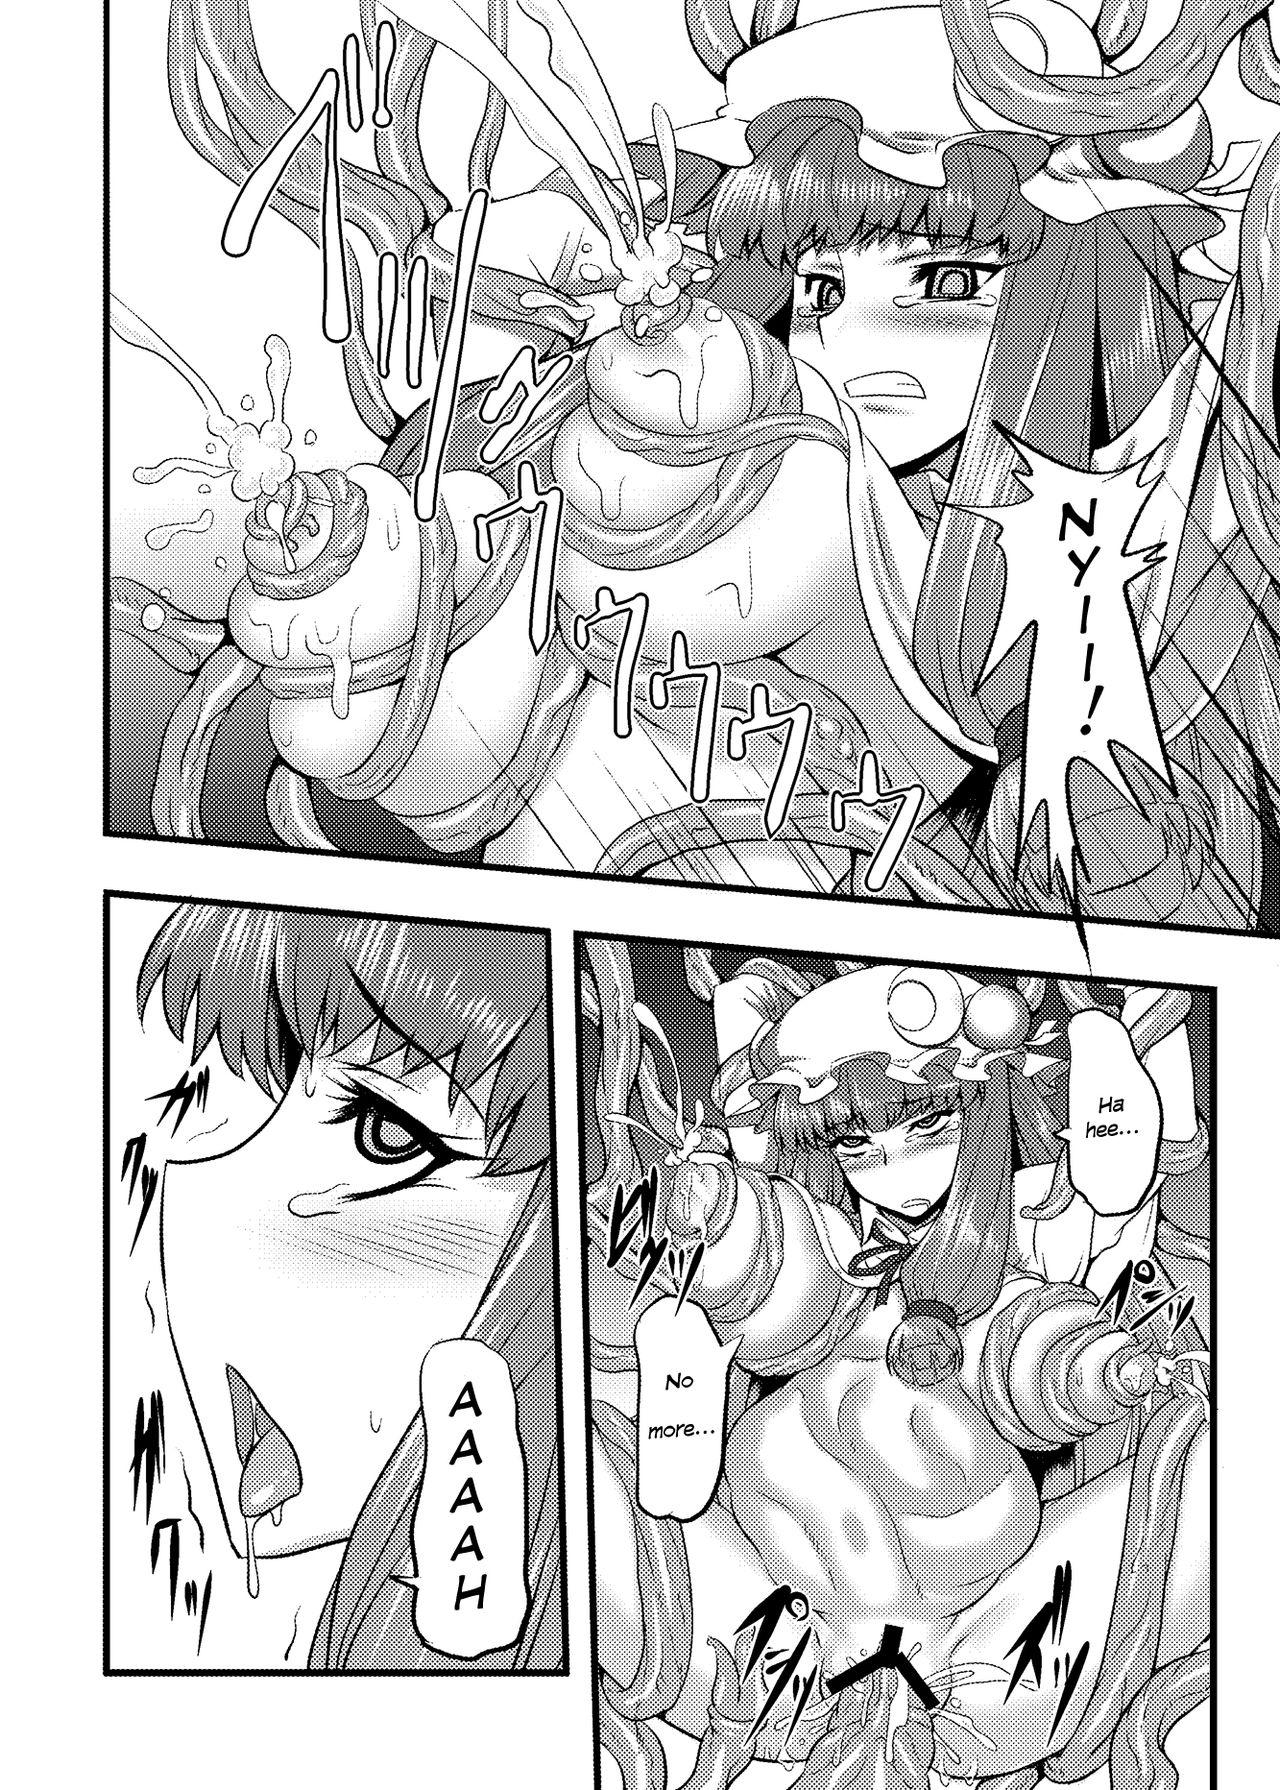 Tinytits Daitoshokan ni Youkoso! | Welcome to the Giant Library! - Touhou project Aunt - Page 6